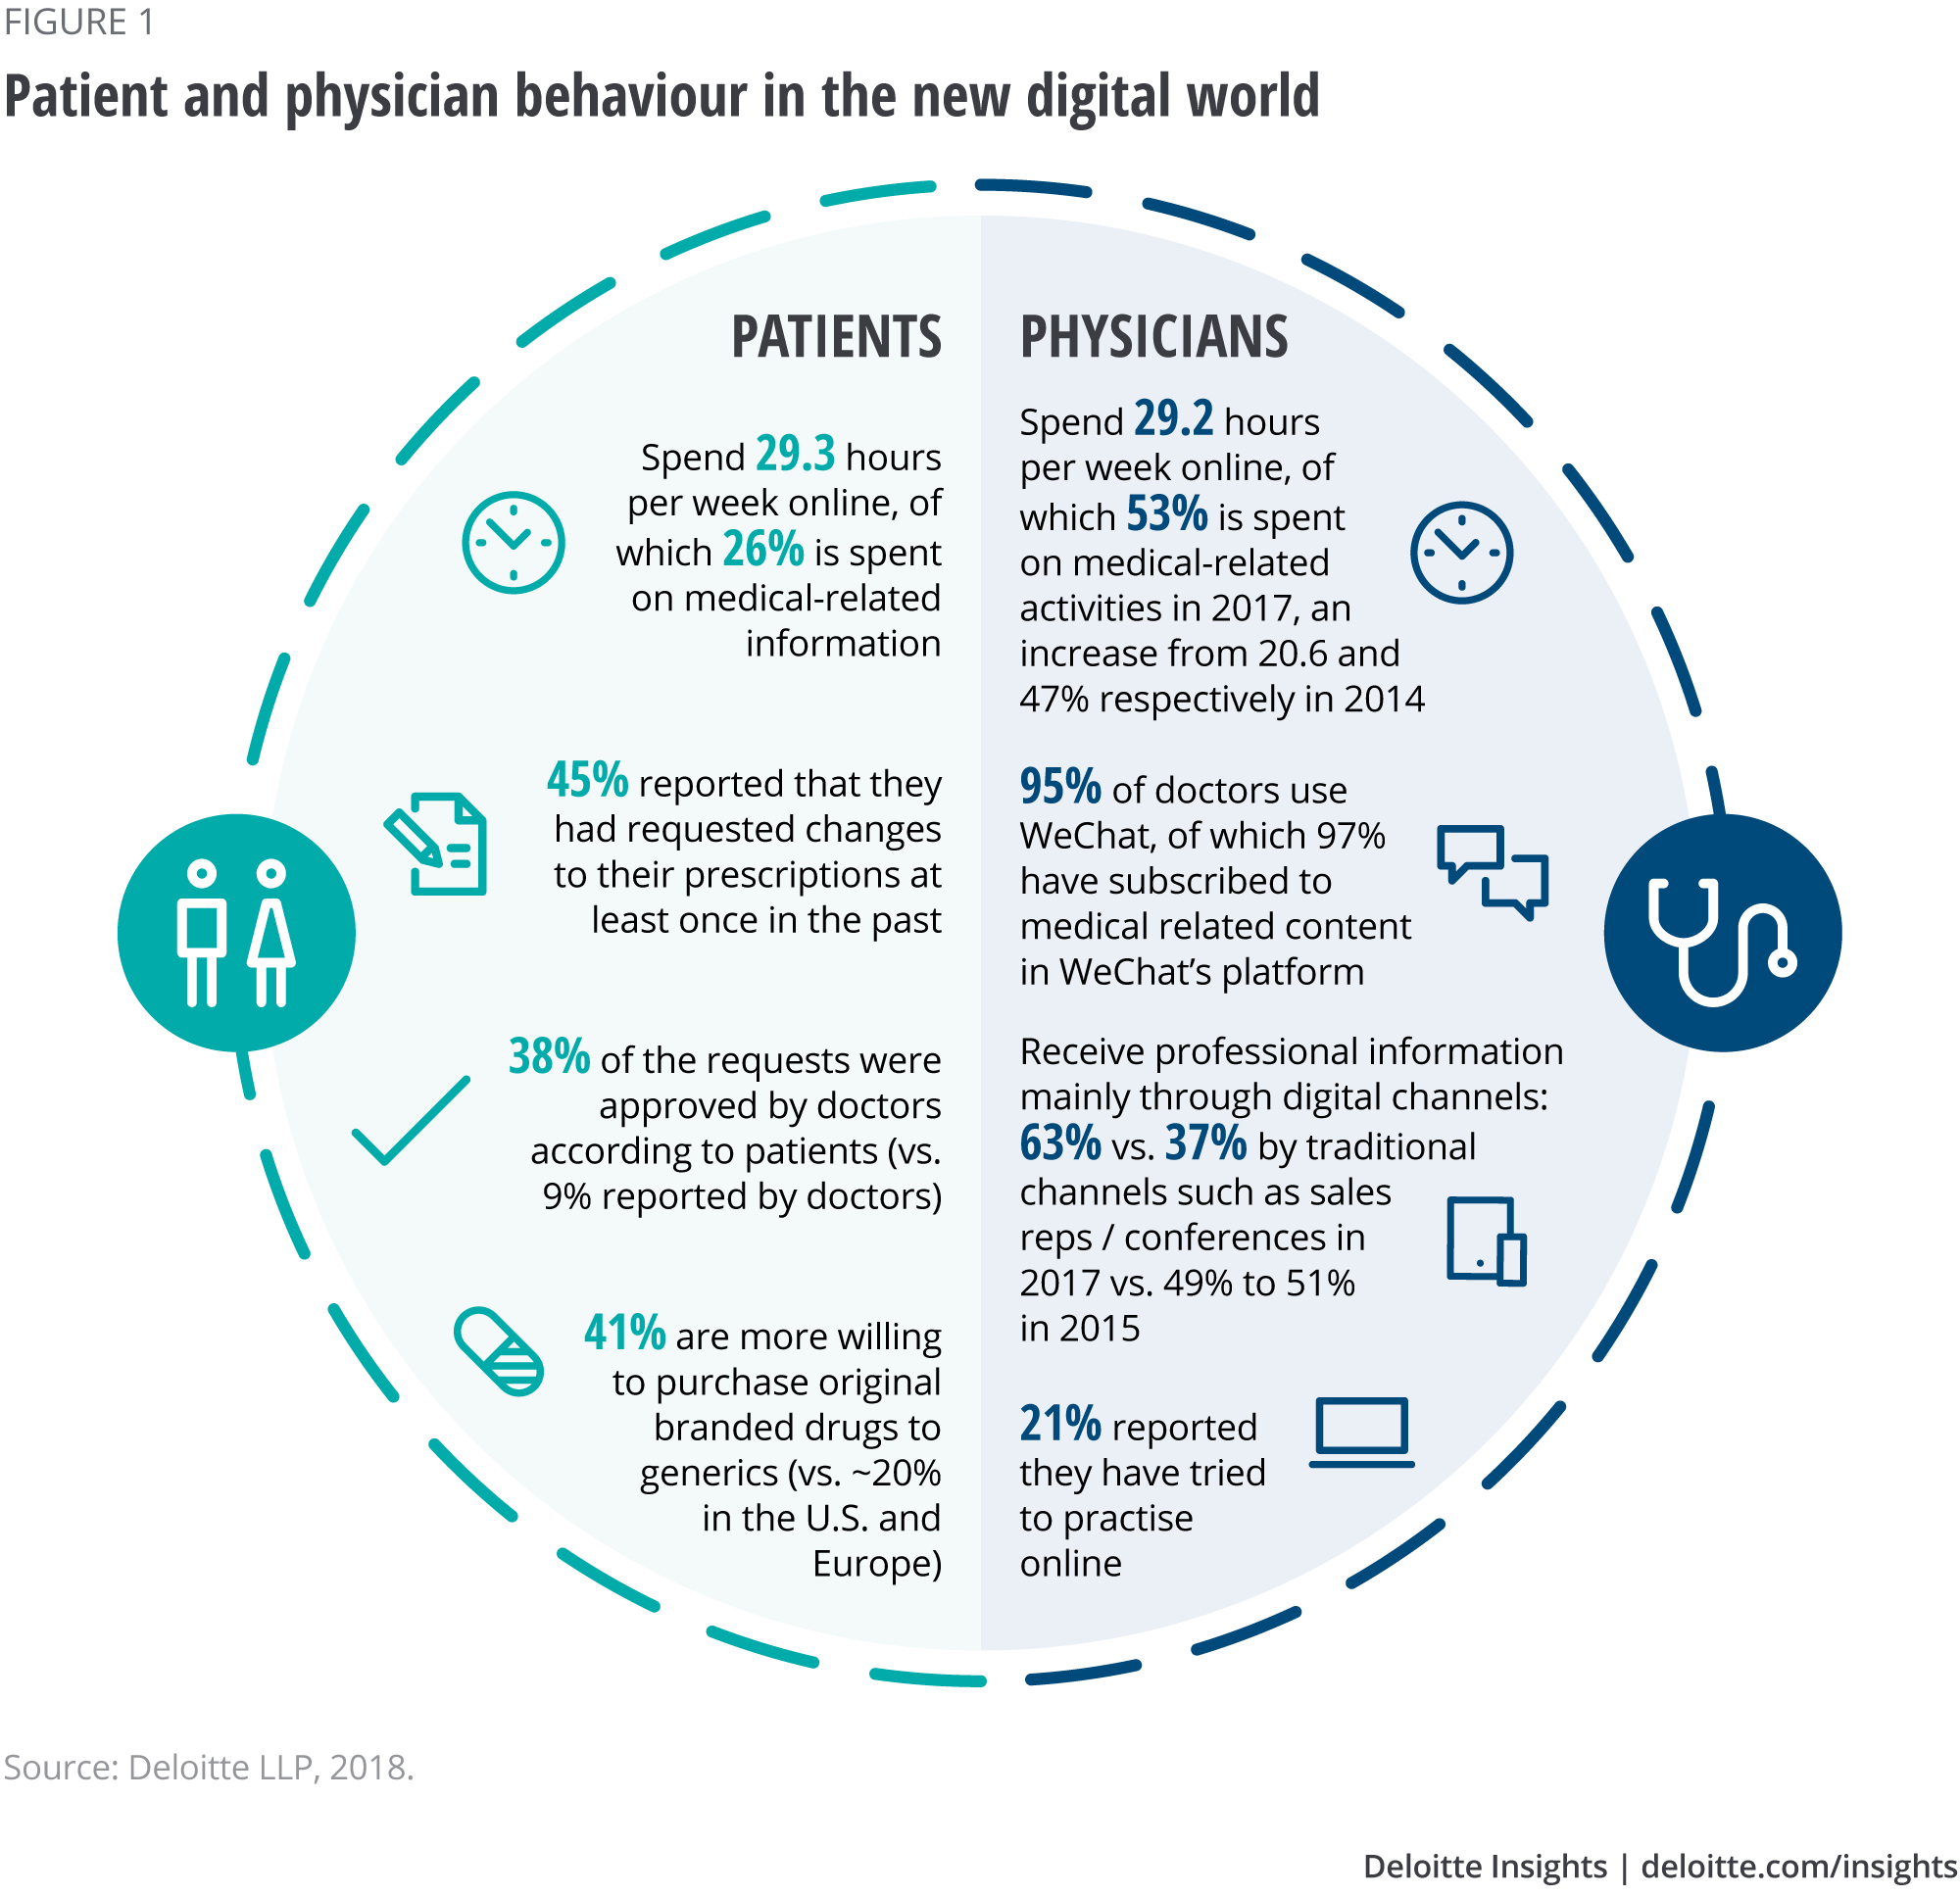 Patient and physician behaviour in the new digital world